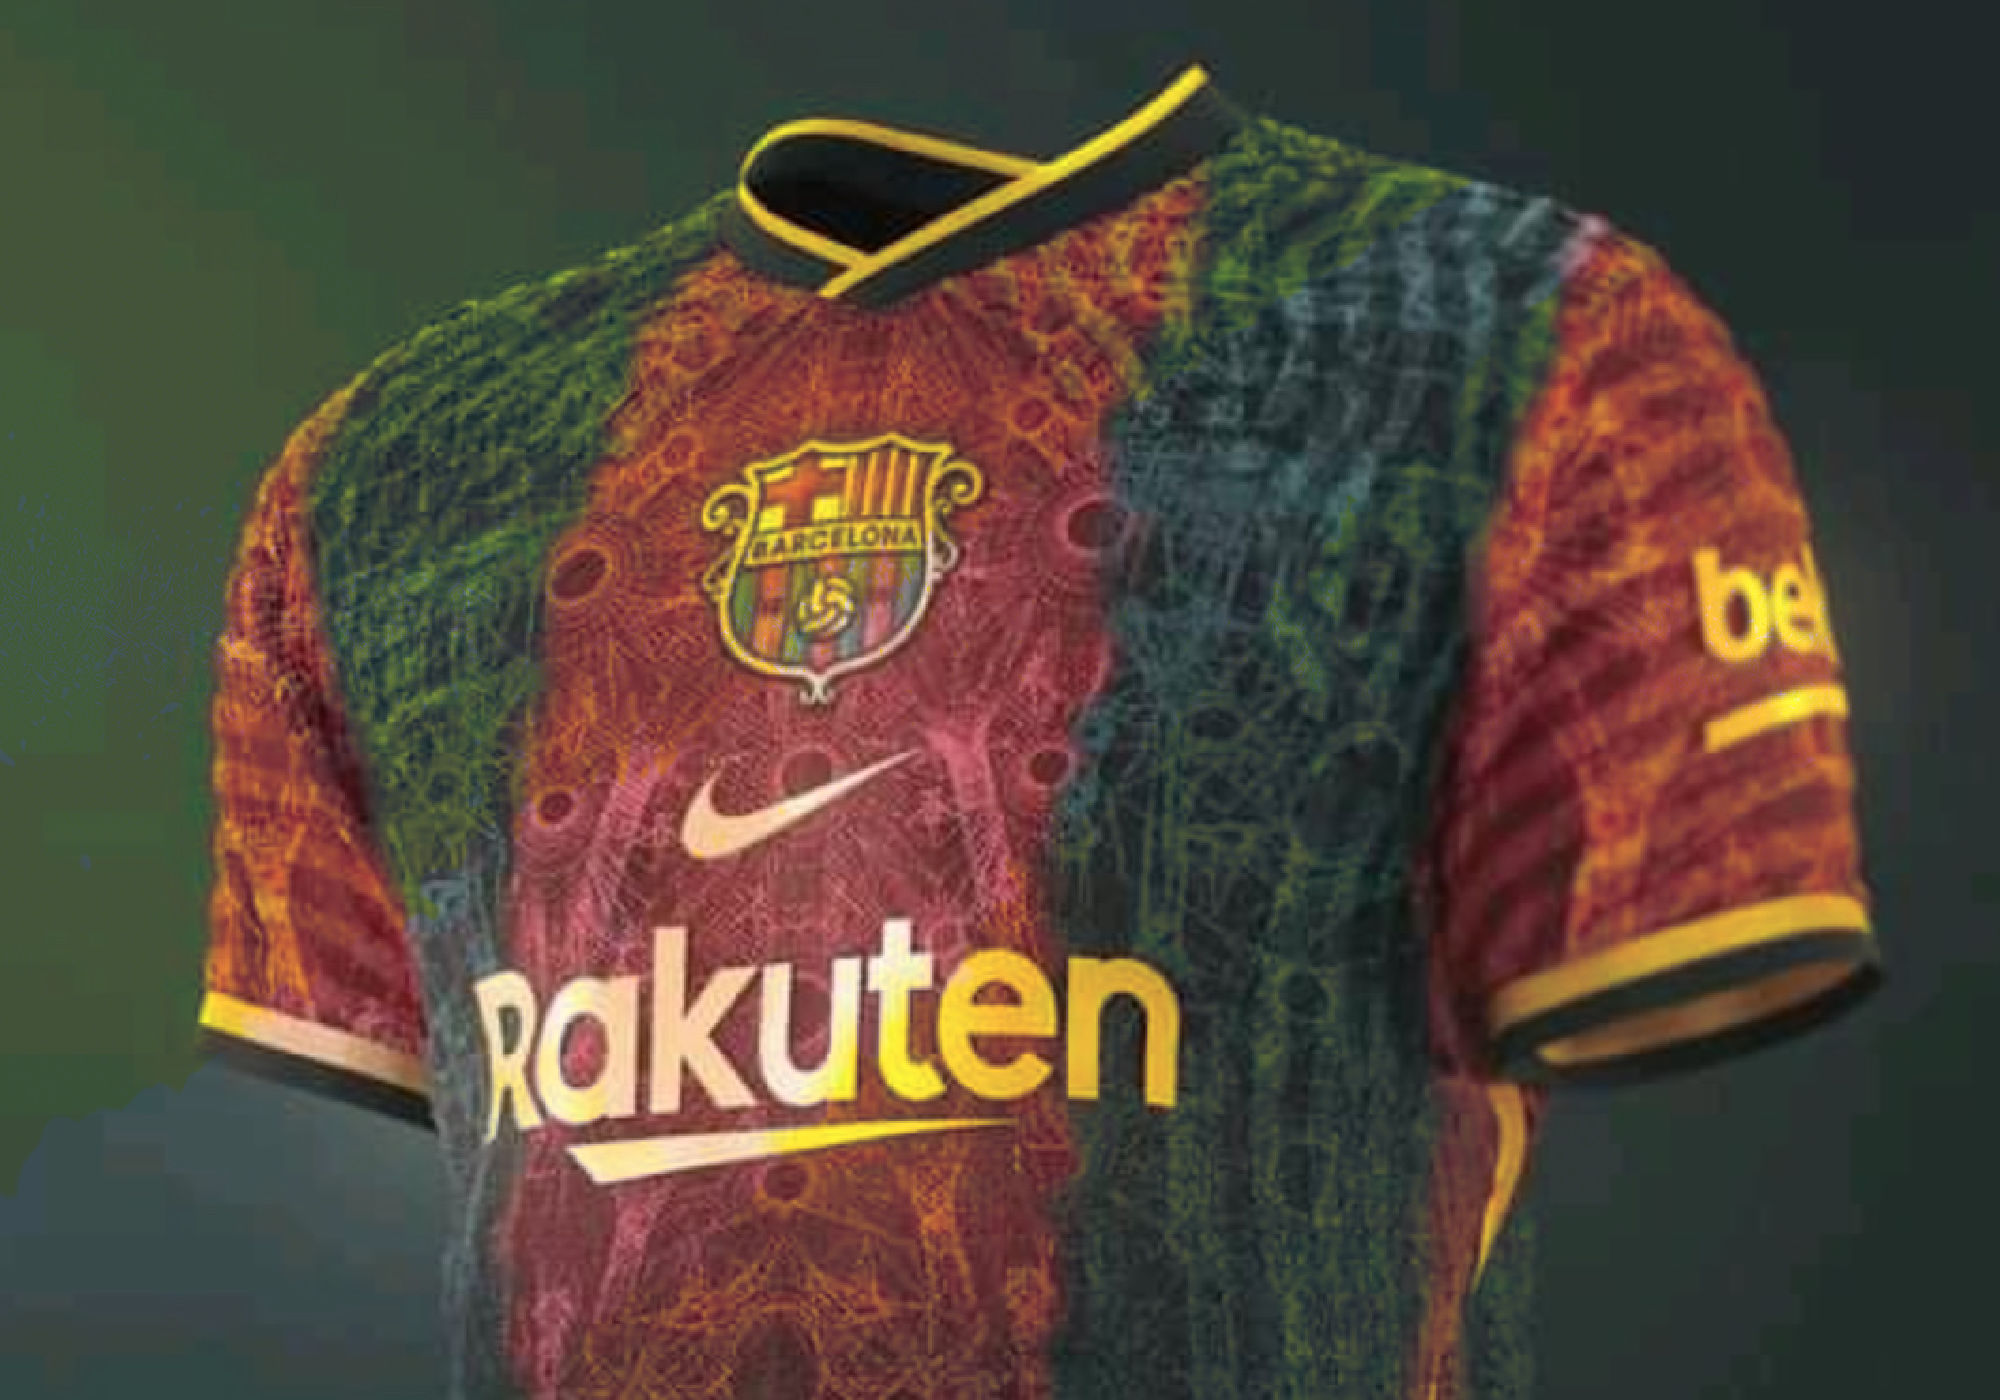 The Nike designs making waves this week feat. Barcelona, Arsenal and Chelsea concept kits